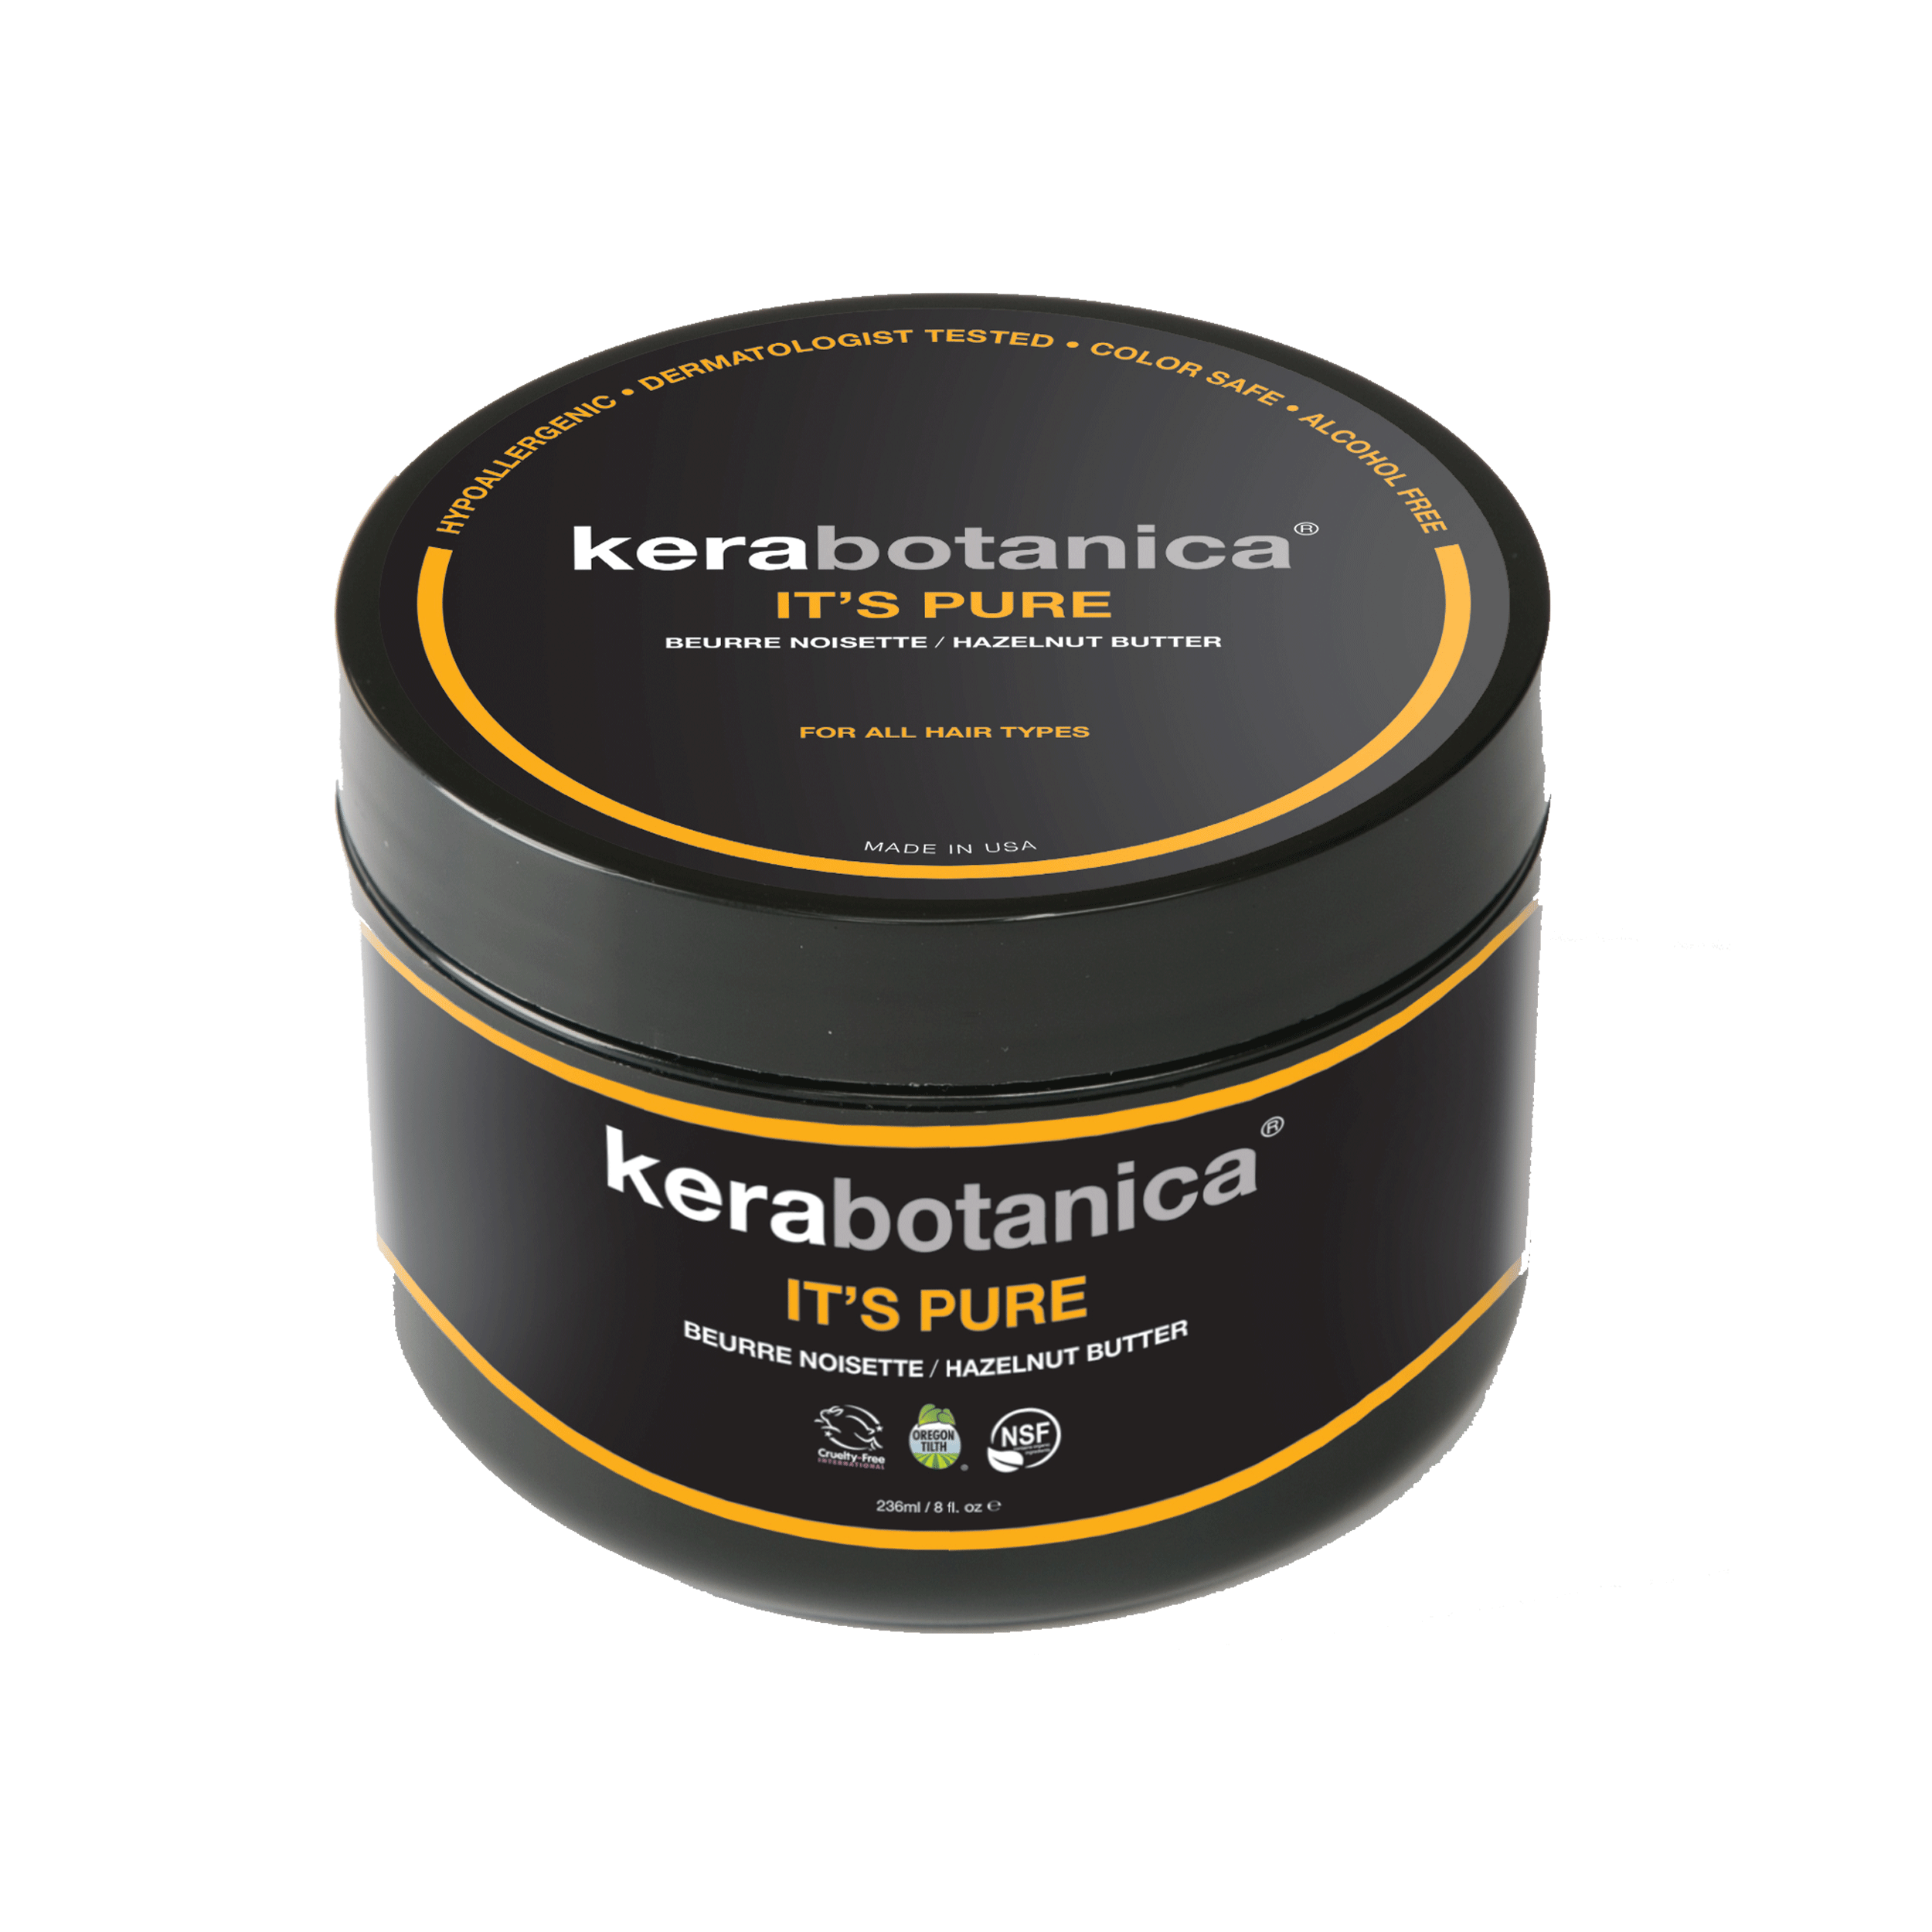 Kerabotanica Product You Had Me At Hello Refreshing Hair Scent Image